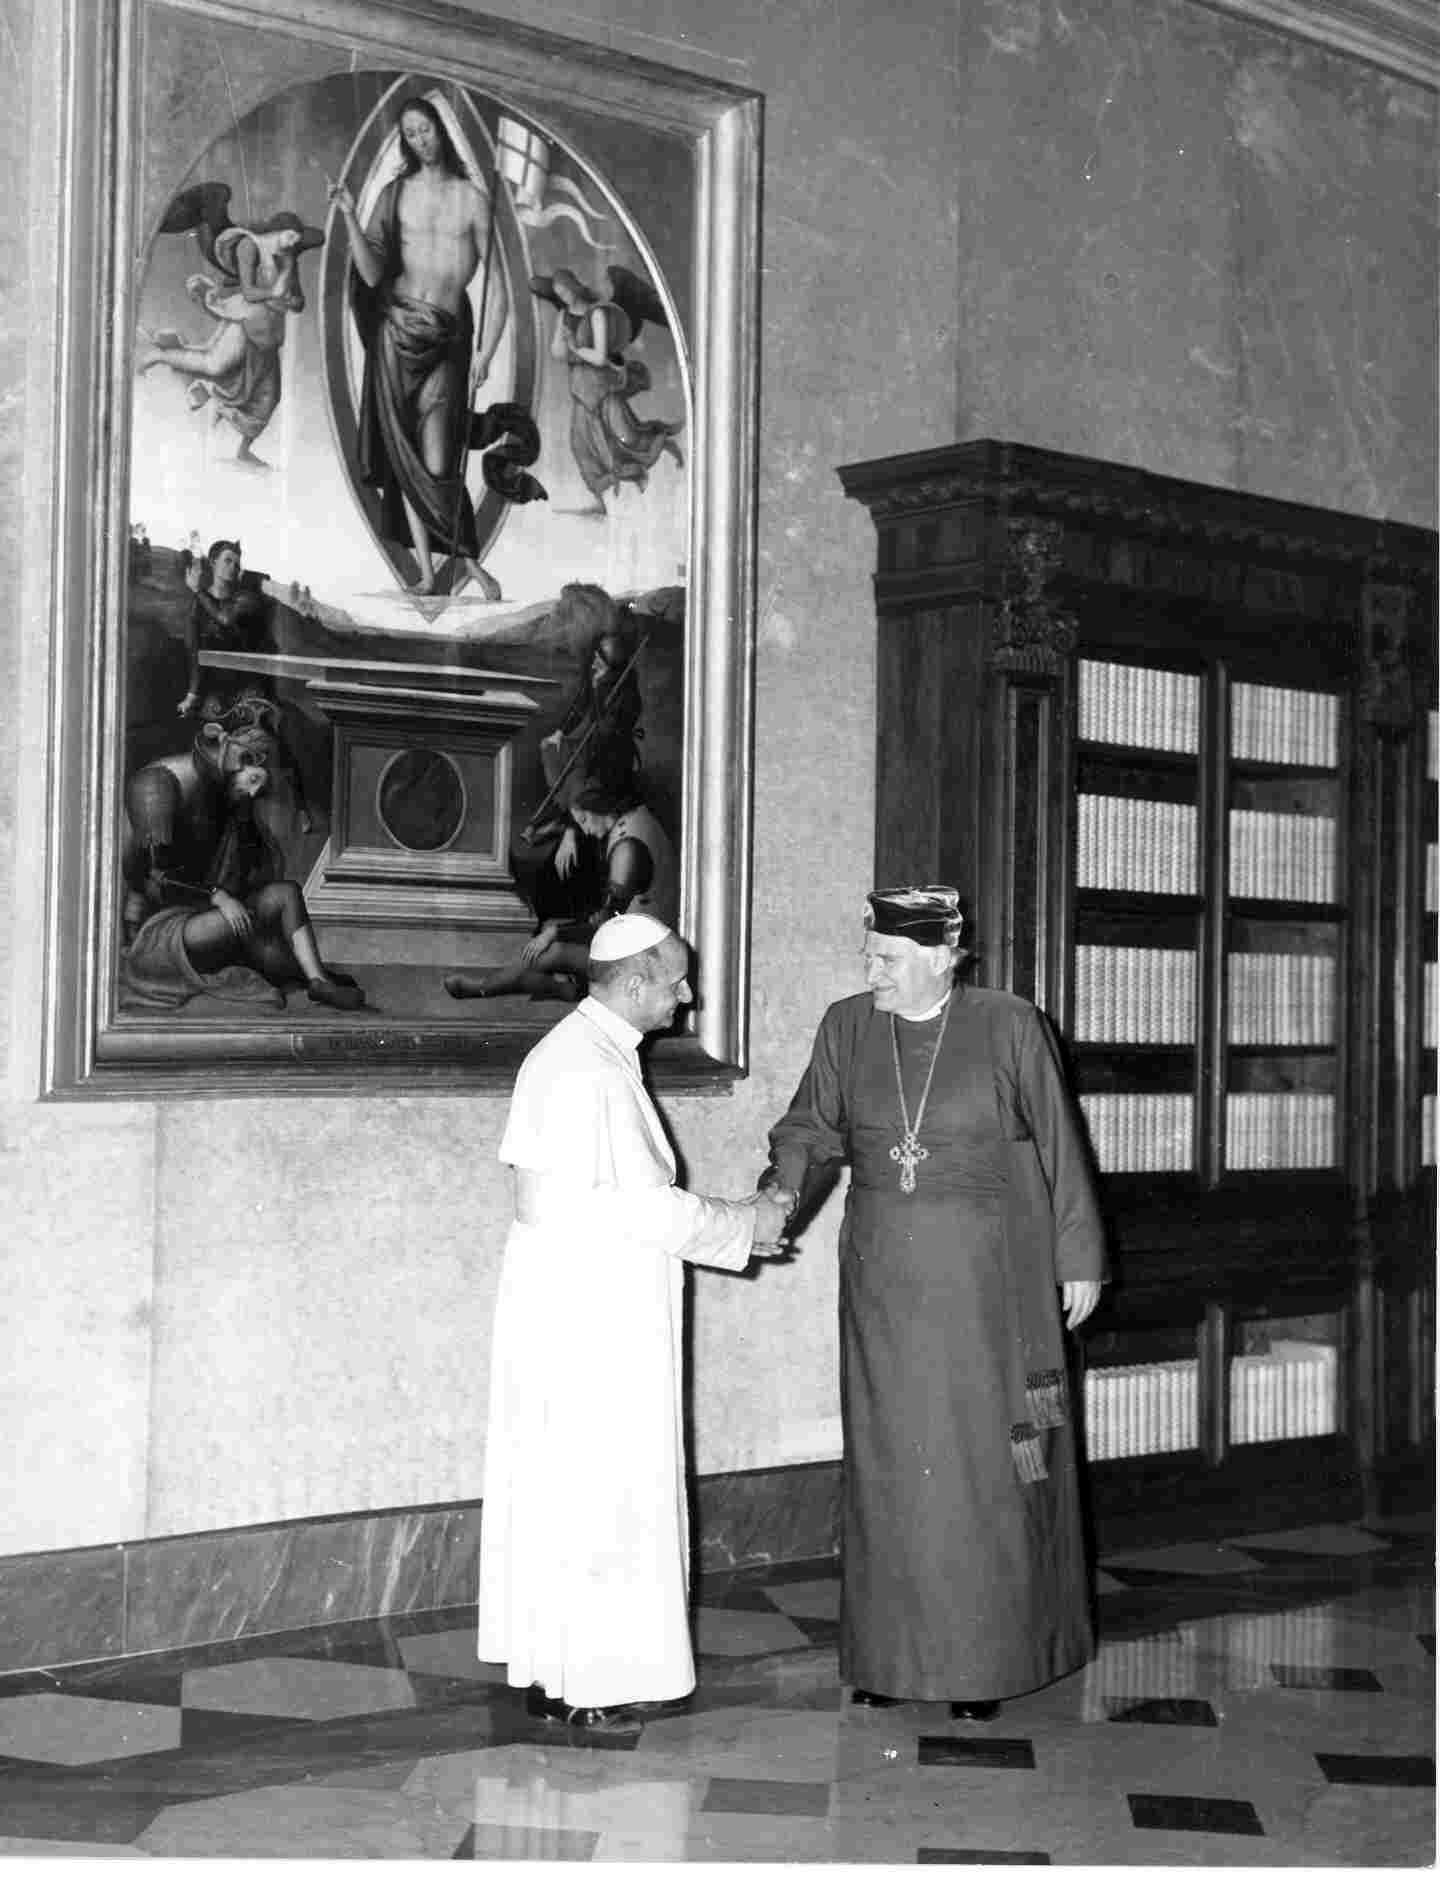 Pope Paul VI and Archbishop of Canterbury Michael Ramsey during the visit of the Archbishop to Rome